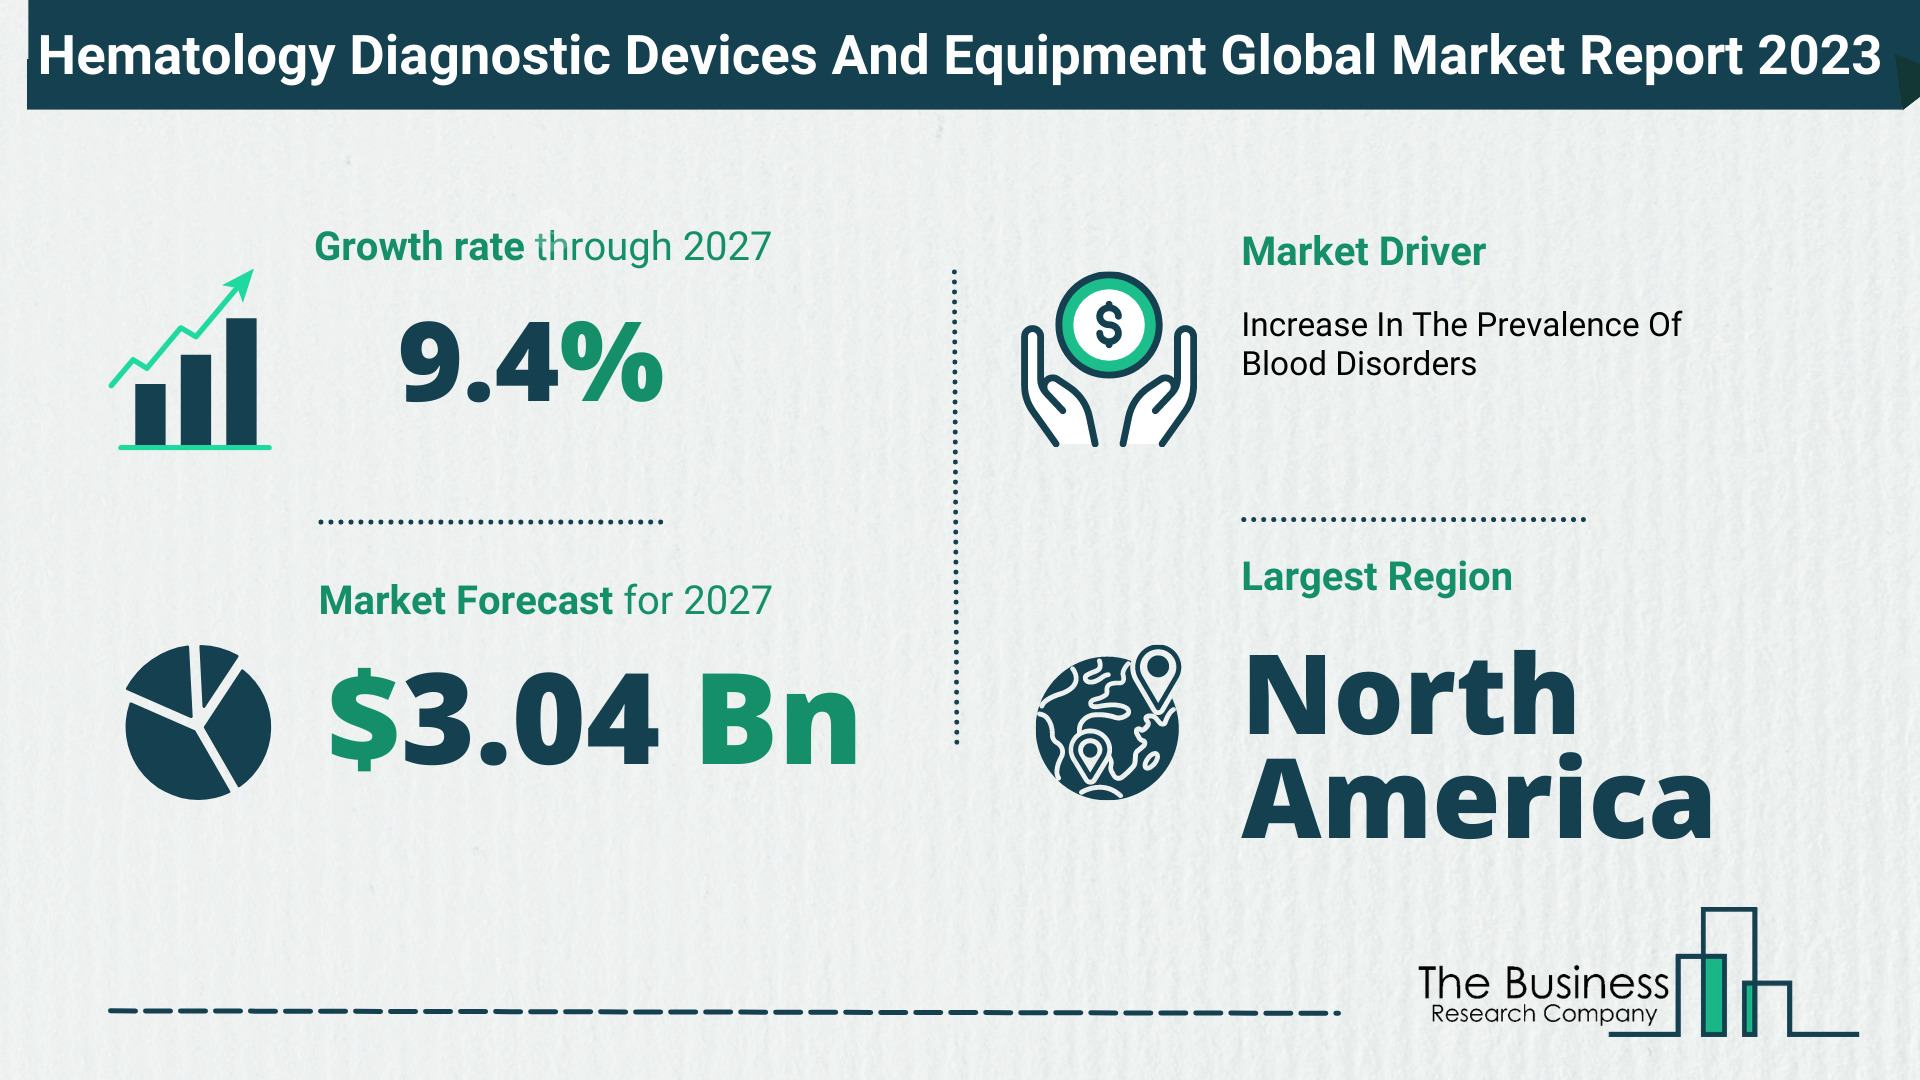 Hematology Diagnostic Devices And Equipment Market Overview: Market Size, Drivers And Trends